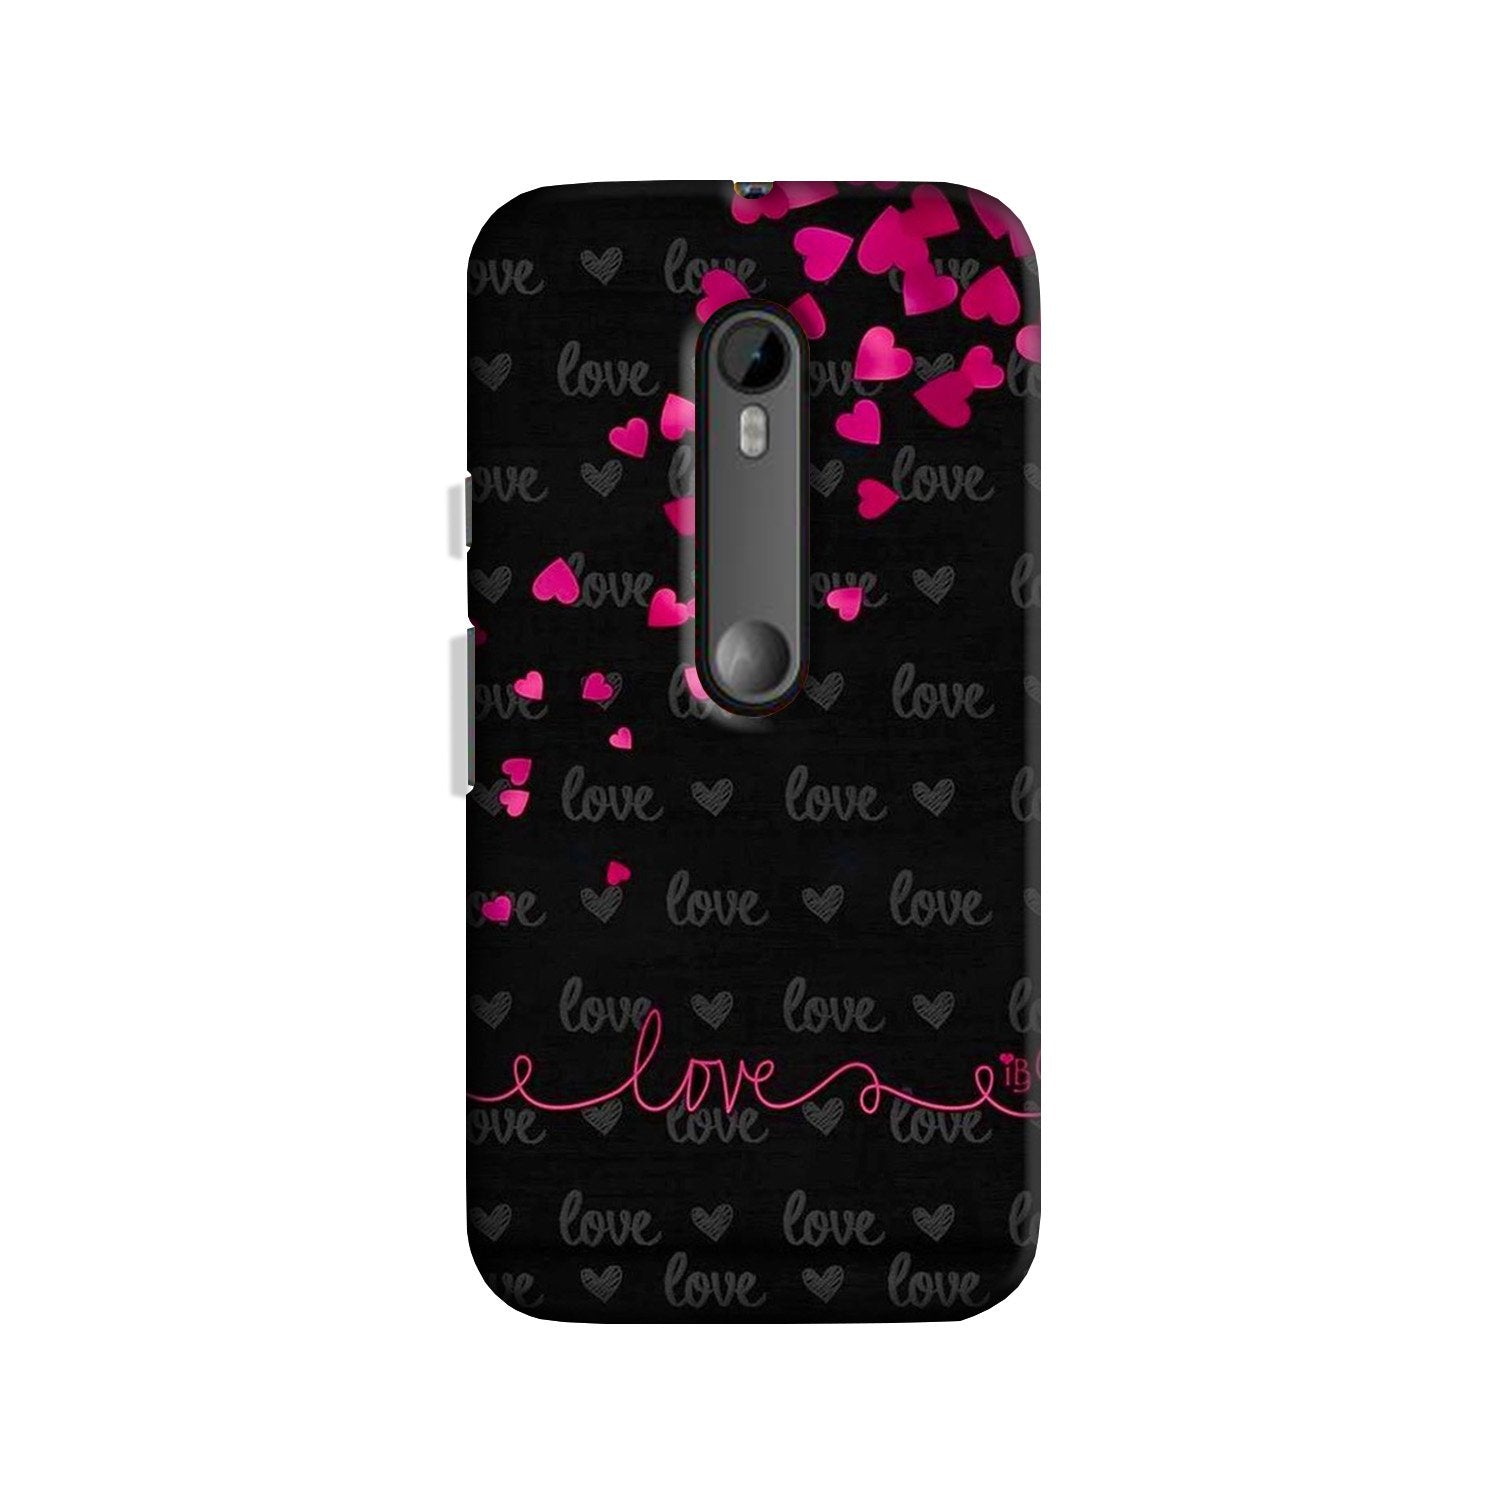 Love in Air Case for Moto X Play